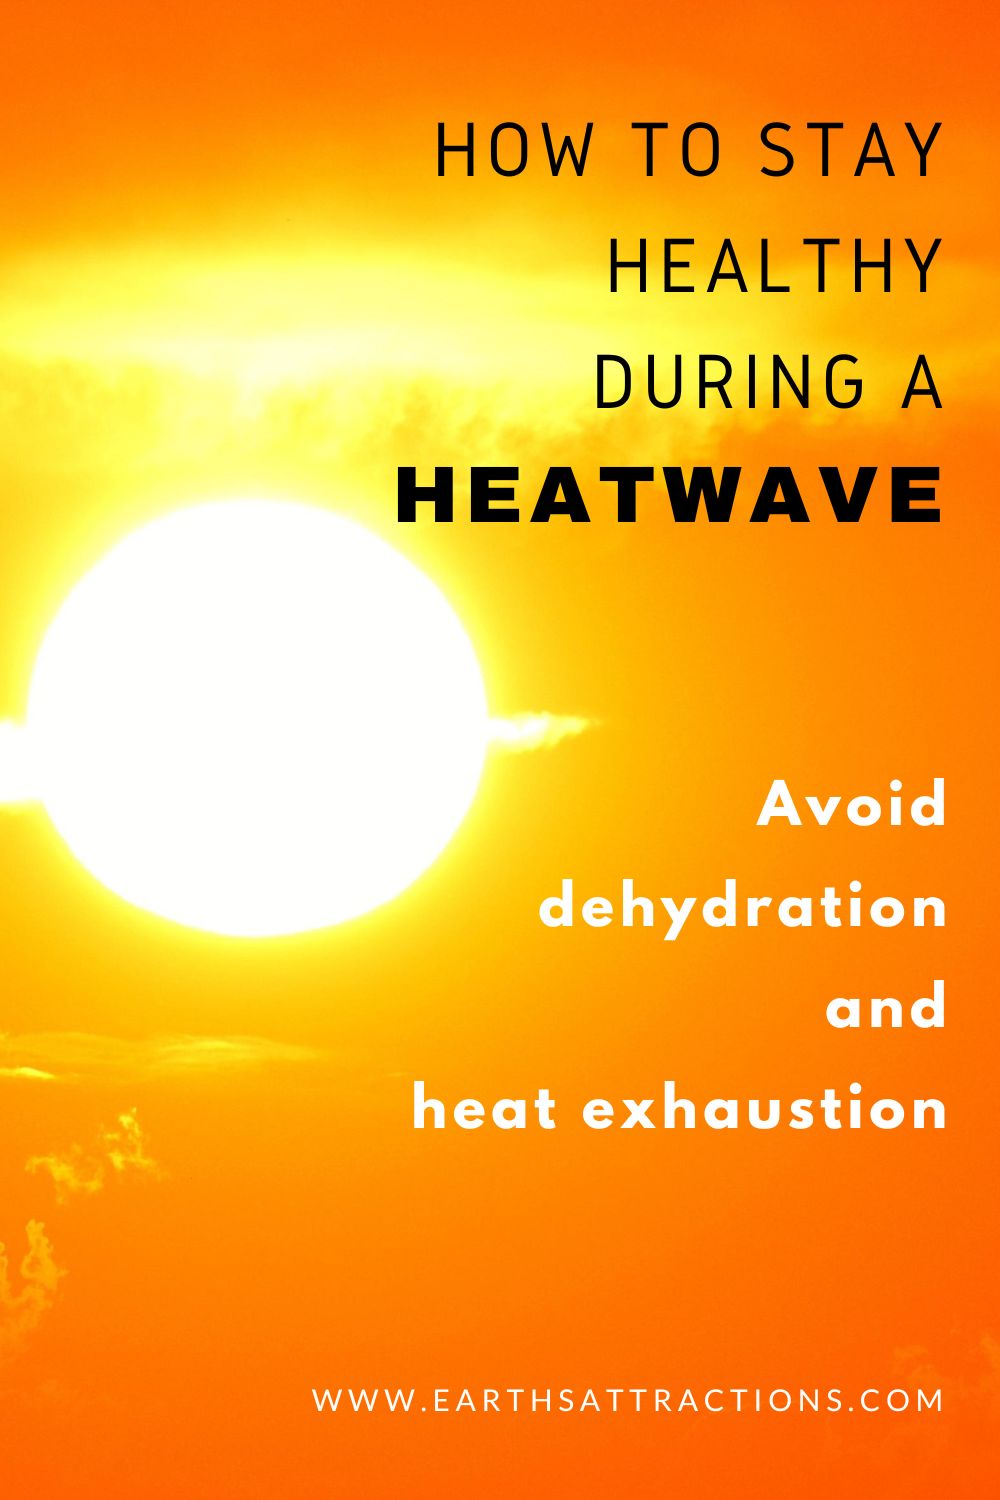 How to stay healthy during a heat wave: Tips to prevent dehydration, heat exhaustion or heatstroke #health #heatwave #summerheatwave #europeansummerheatwave #canadaheatwave #usaheatwave #americaheatwave